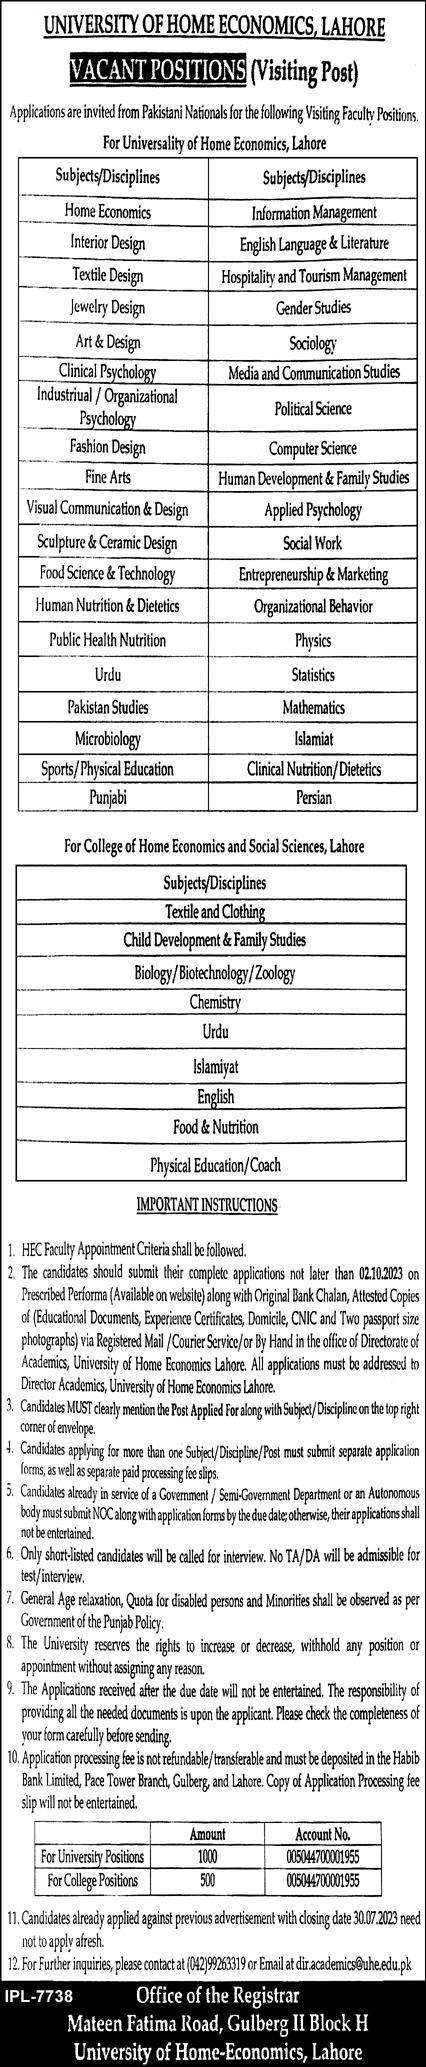 Exciting Teaching Opportunities at University of Home Economics Lahore